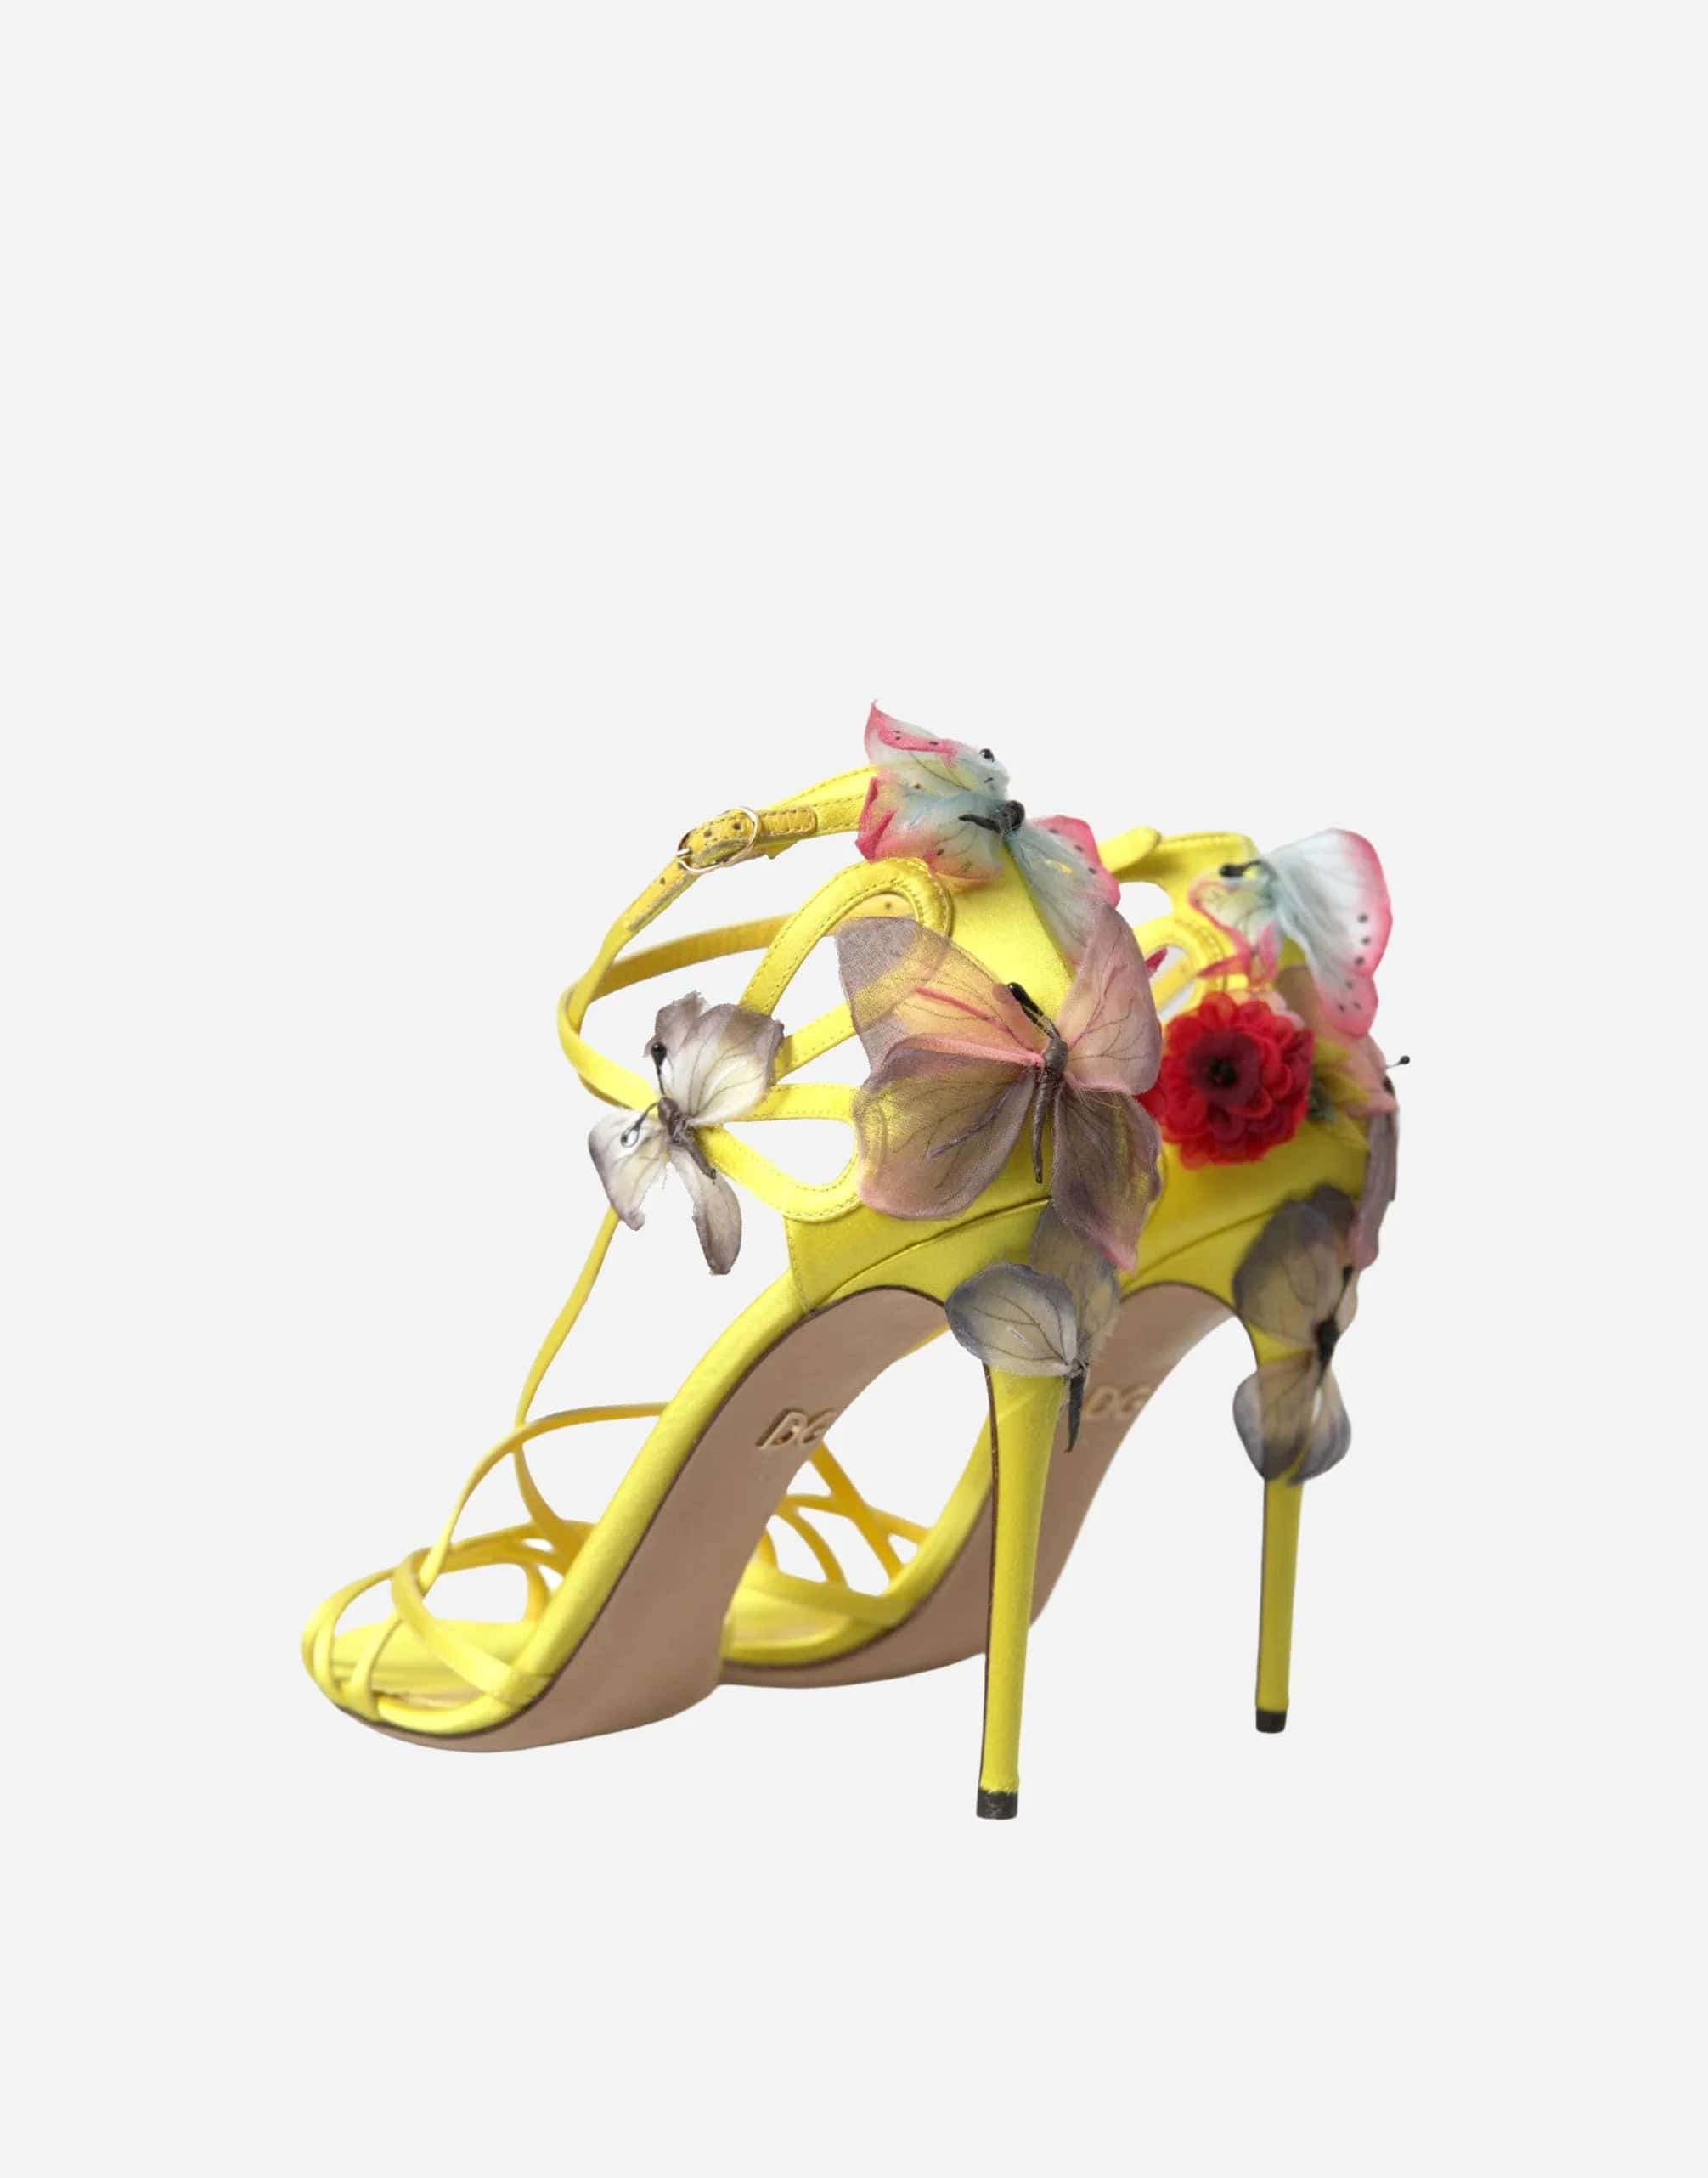 Woman with Yellow and Pink High Heel Butterfly Shoes before Salvatore  Ferragamo Fashion Show, Milan Fashion Editorial Photography - Image of heel,  high: 195190772